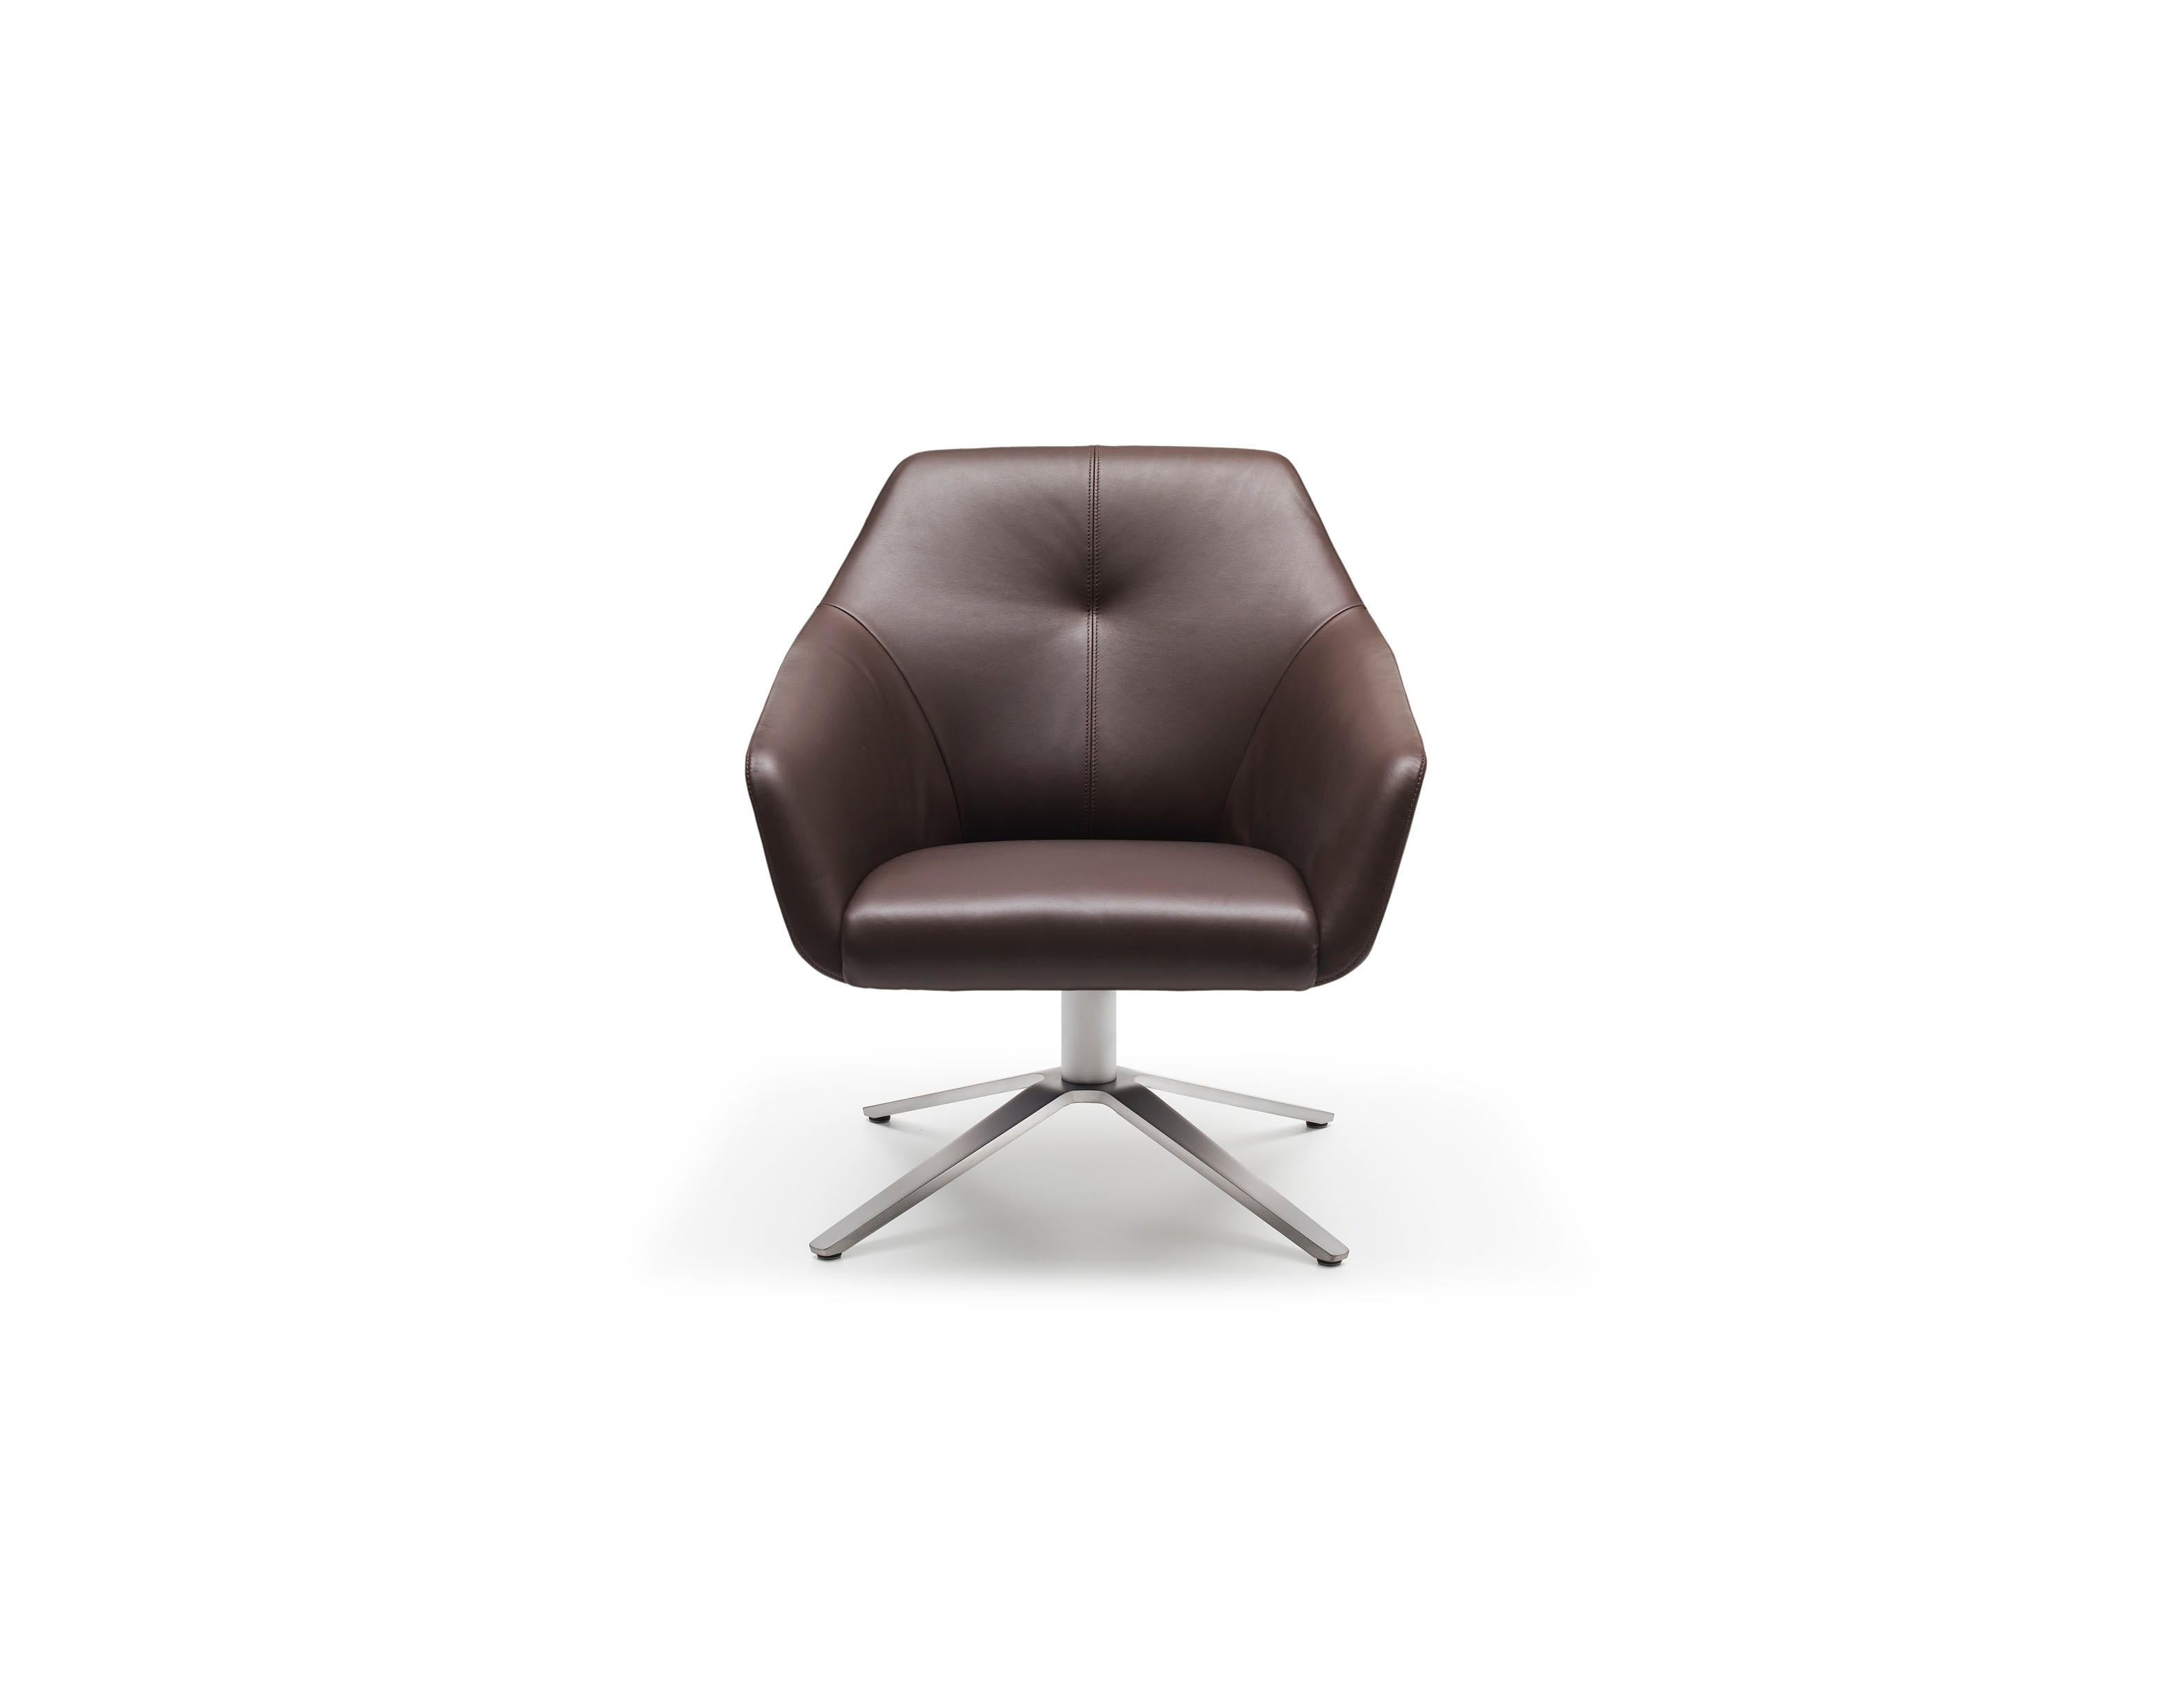 DS-278 chair by De Sede
Design: Christian Werner
Dimensions: D 51 x W 69 x H 76 cm
Materials: steel, leather

Prices may change according to the chosen materials and size. 

A relaxing miracle for all desires

Low- or high-backed chairs